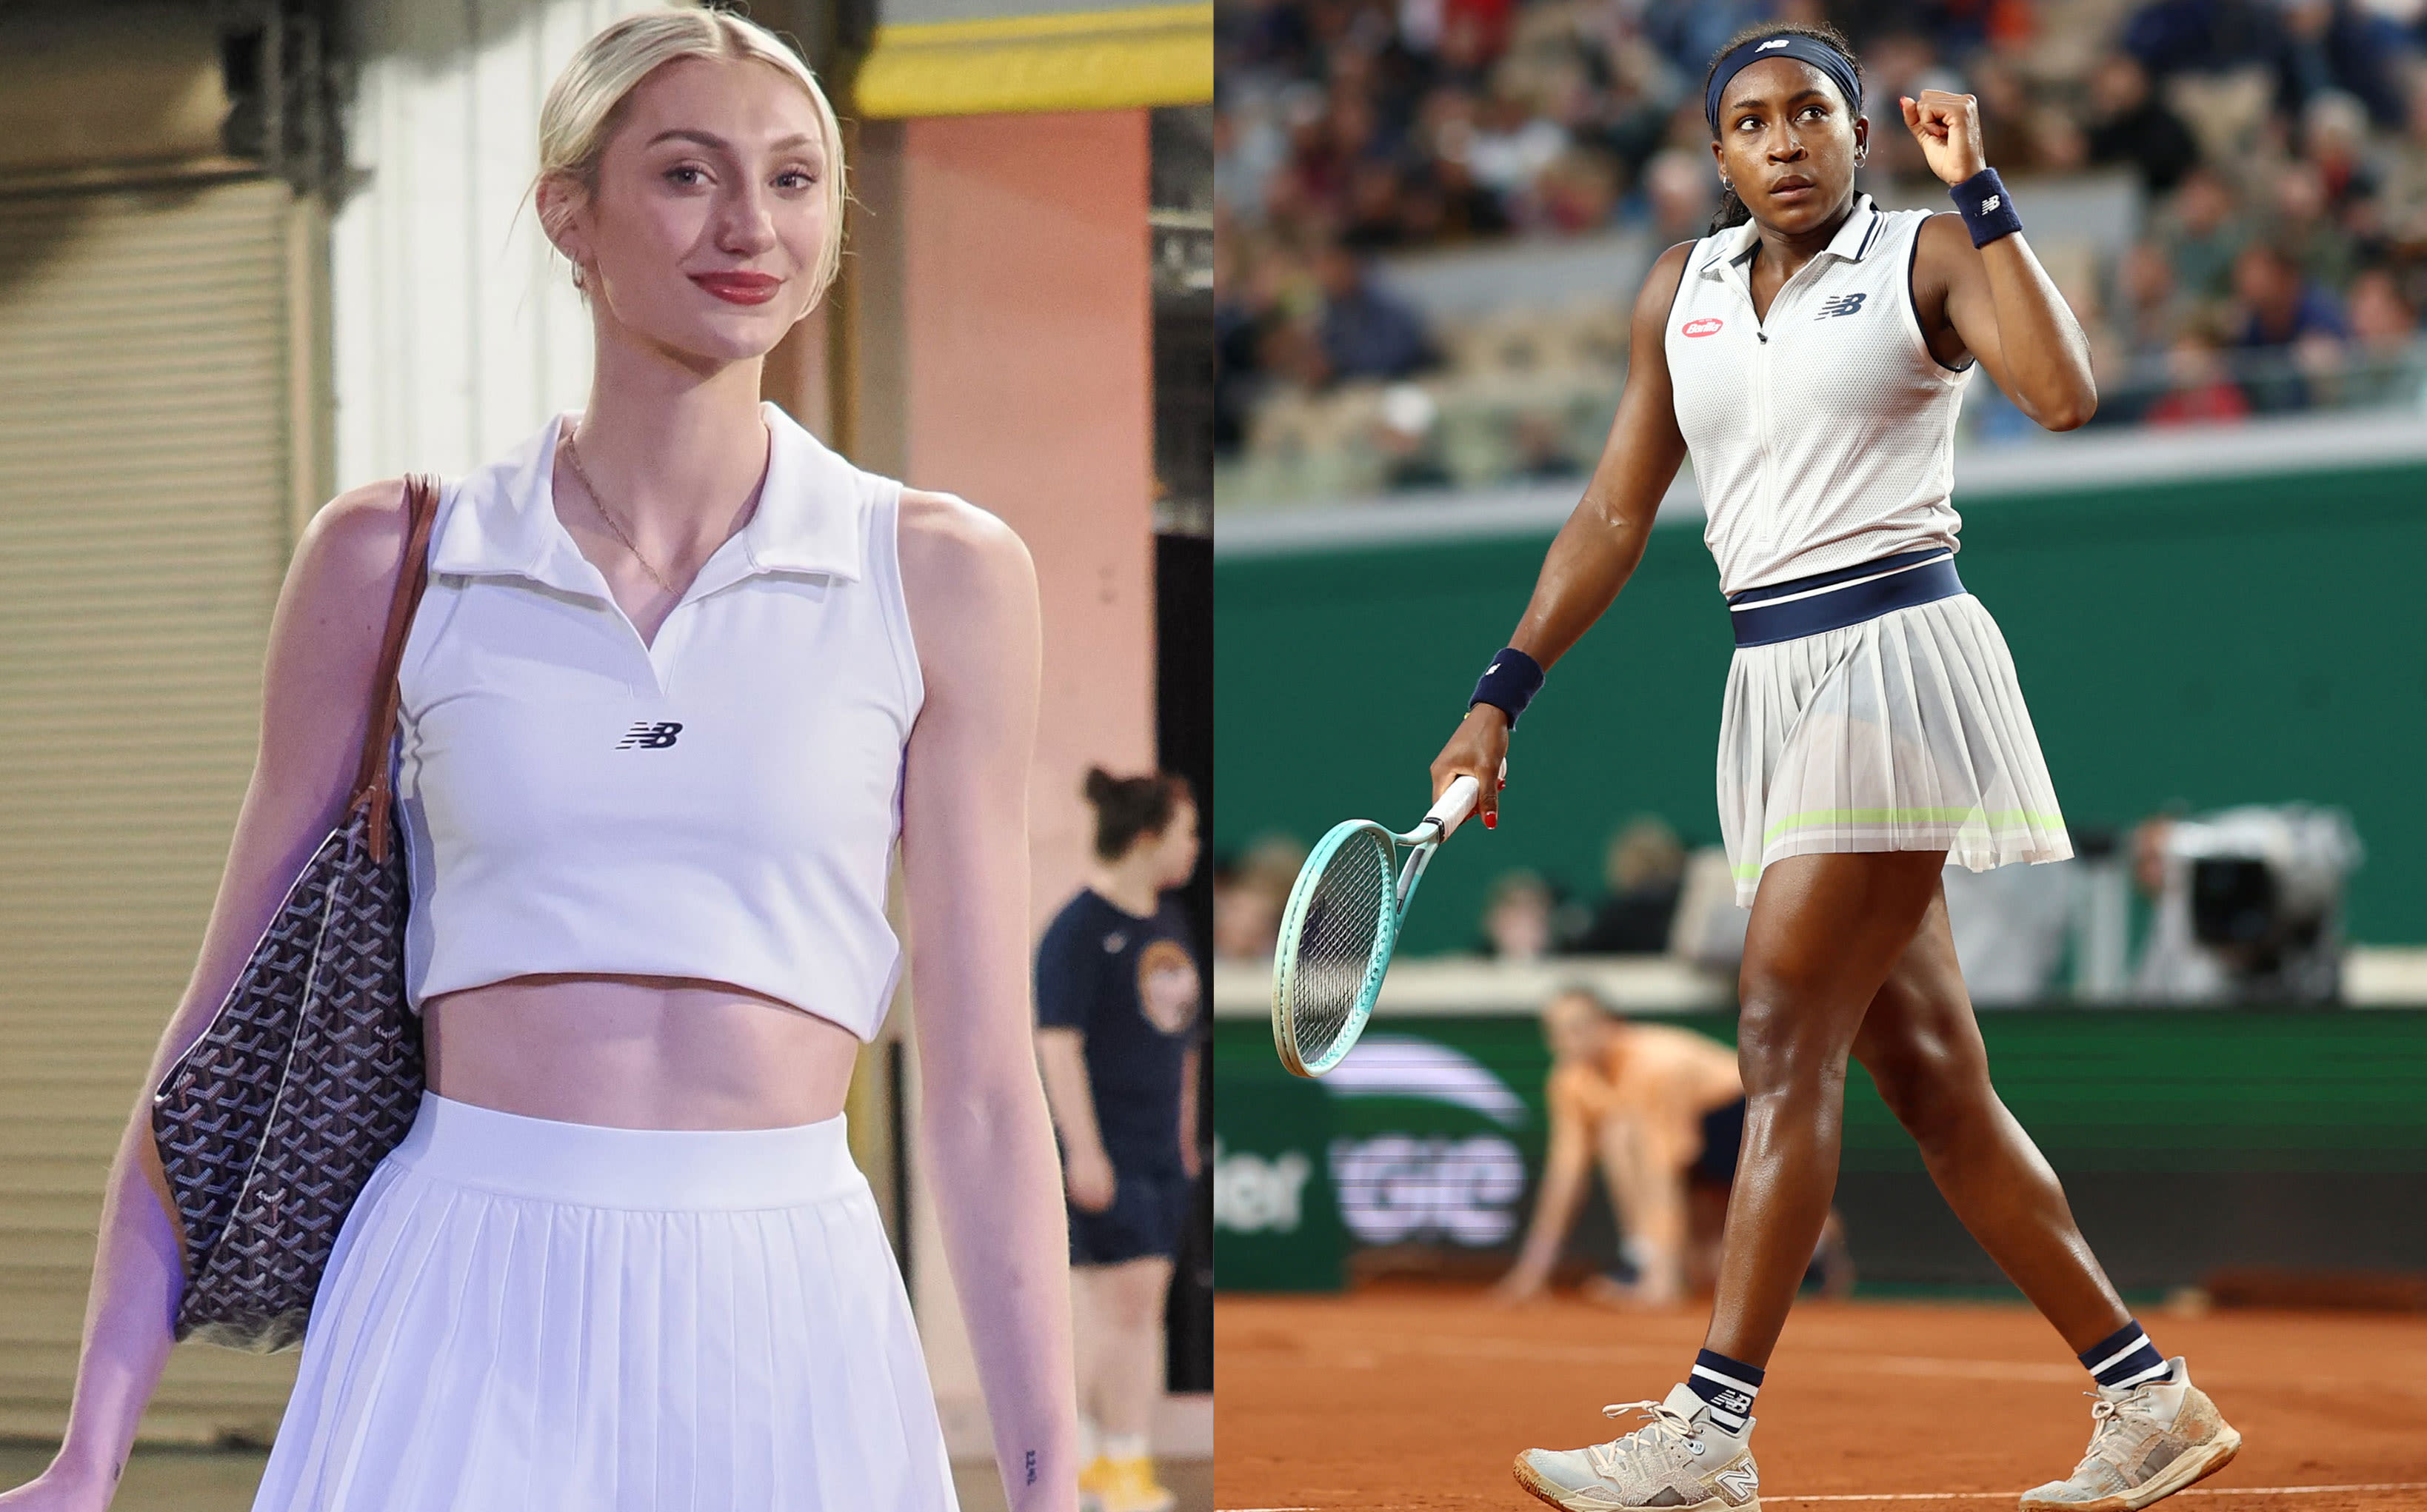 WNBA star Cameron Brink takes inspiration from Coco Gauff with pre-game outfit | Tennis.com